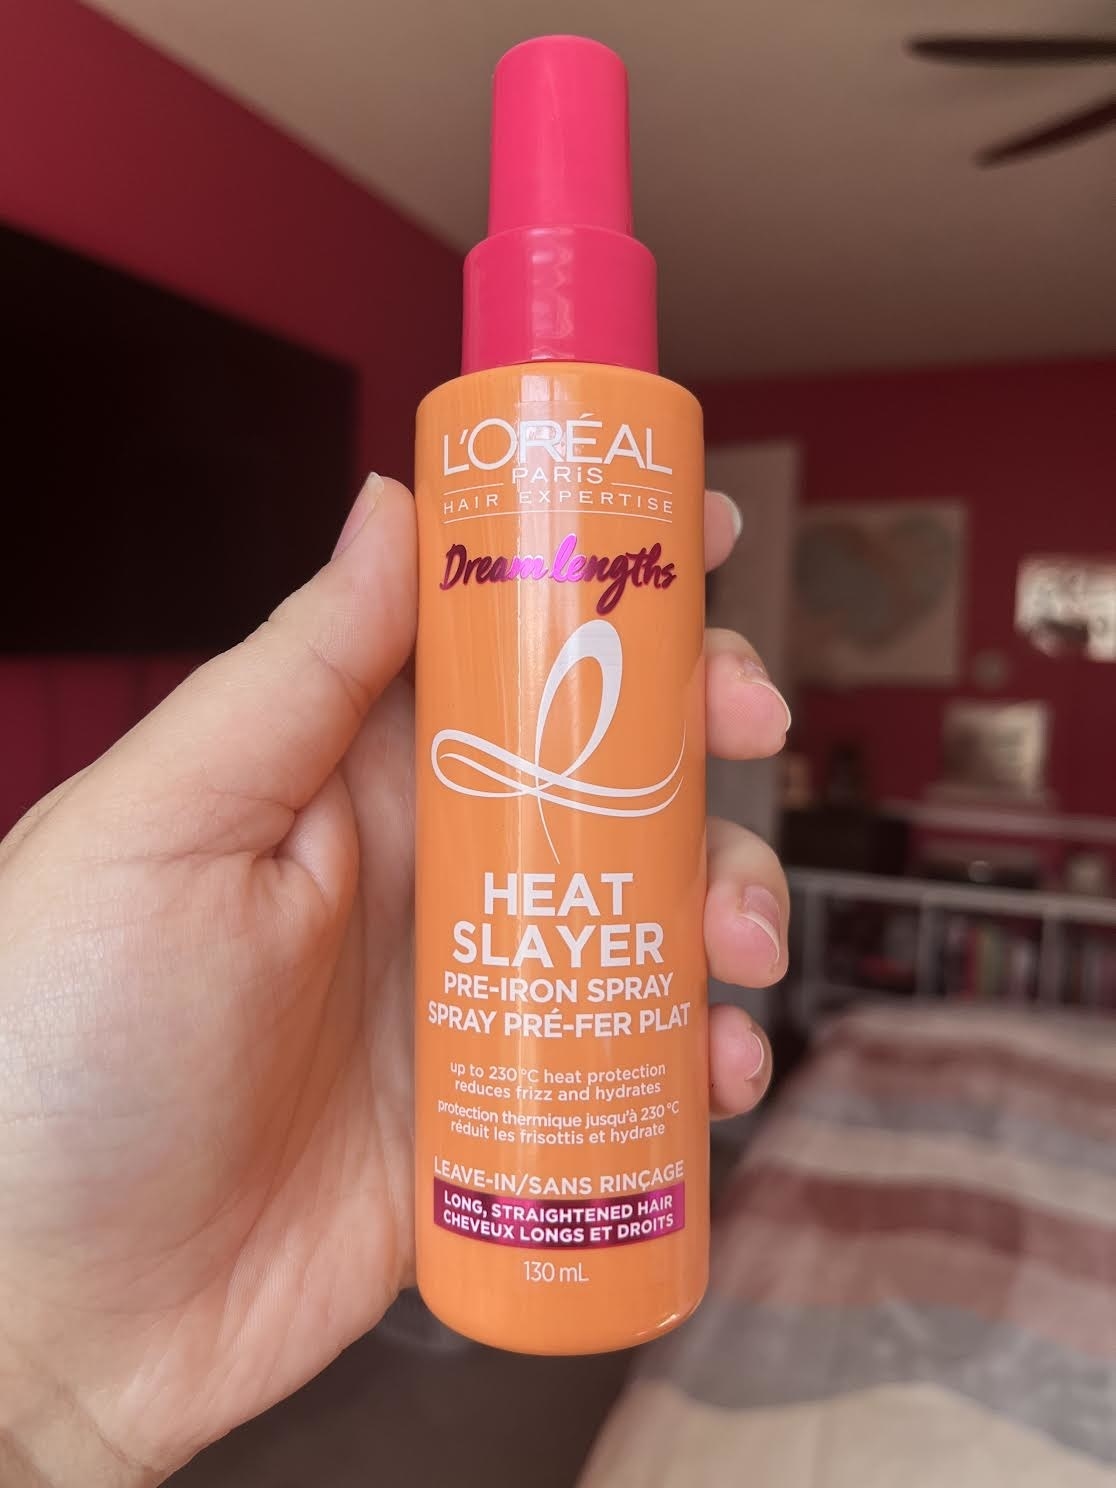 Bianca holding up the heat spray in a bedroom